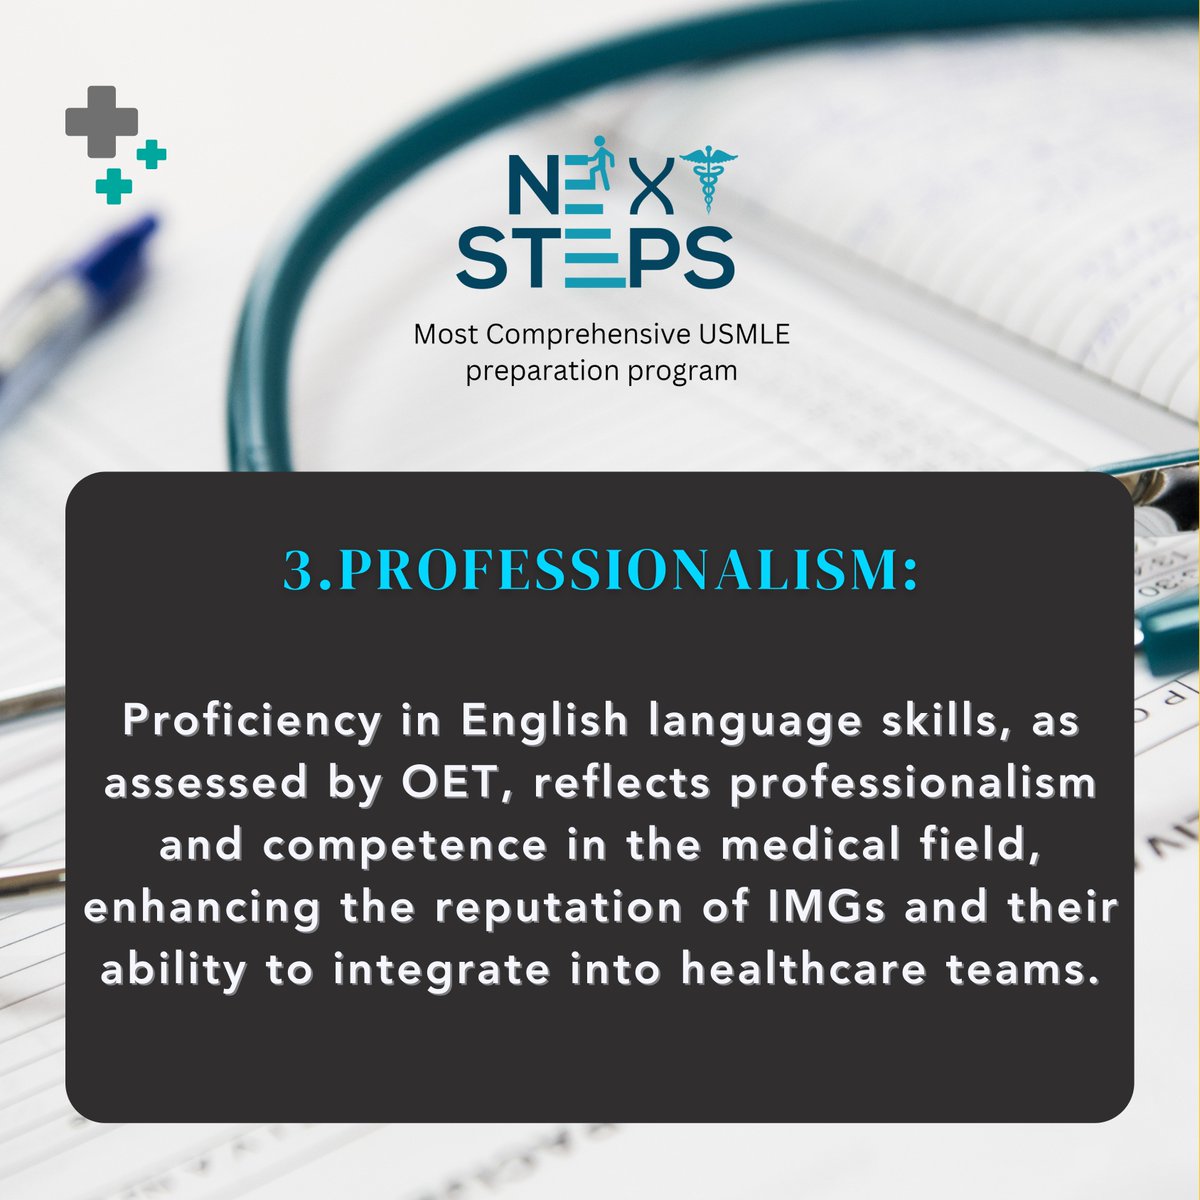 Unlock your pathway to residency success with OET! 🌟
Enroll Now: nextstepscareer.com/enroll-now/

#usmle #clinicalrotations #inpatient #Residency #residencymatch #usmlematch #usmlepreparation #nextsteps #nextstepsusmle